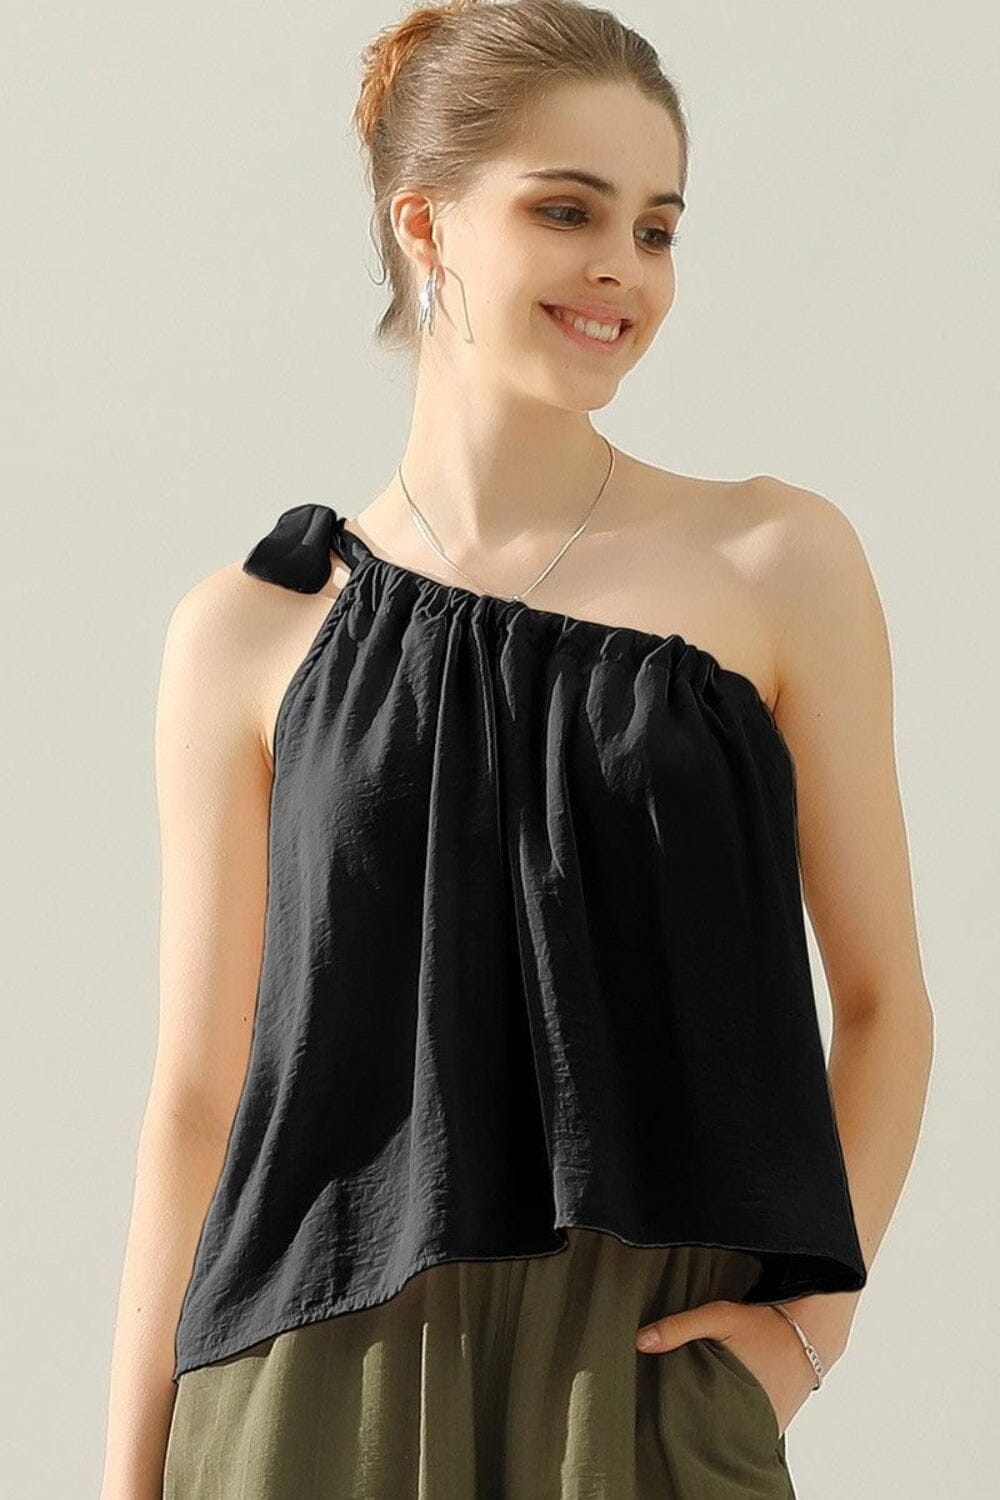 Ninexis One Shoulder Bow Tie Strap Satin Silk Top Shirts & Tops jehouze 